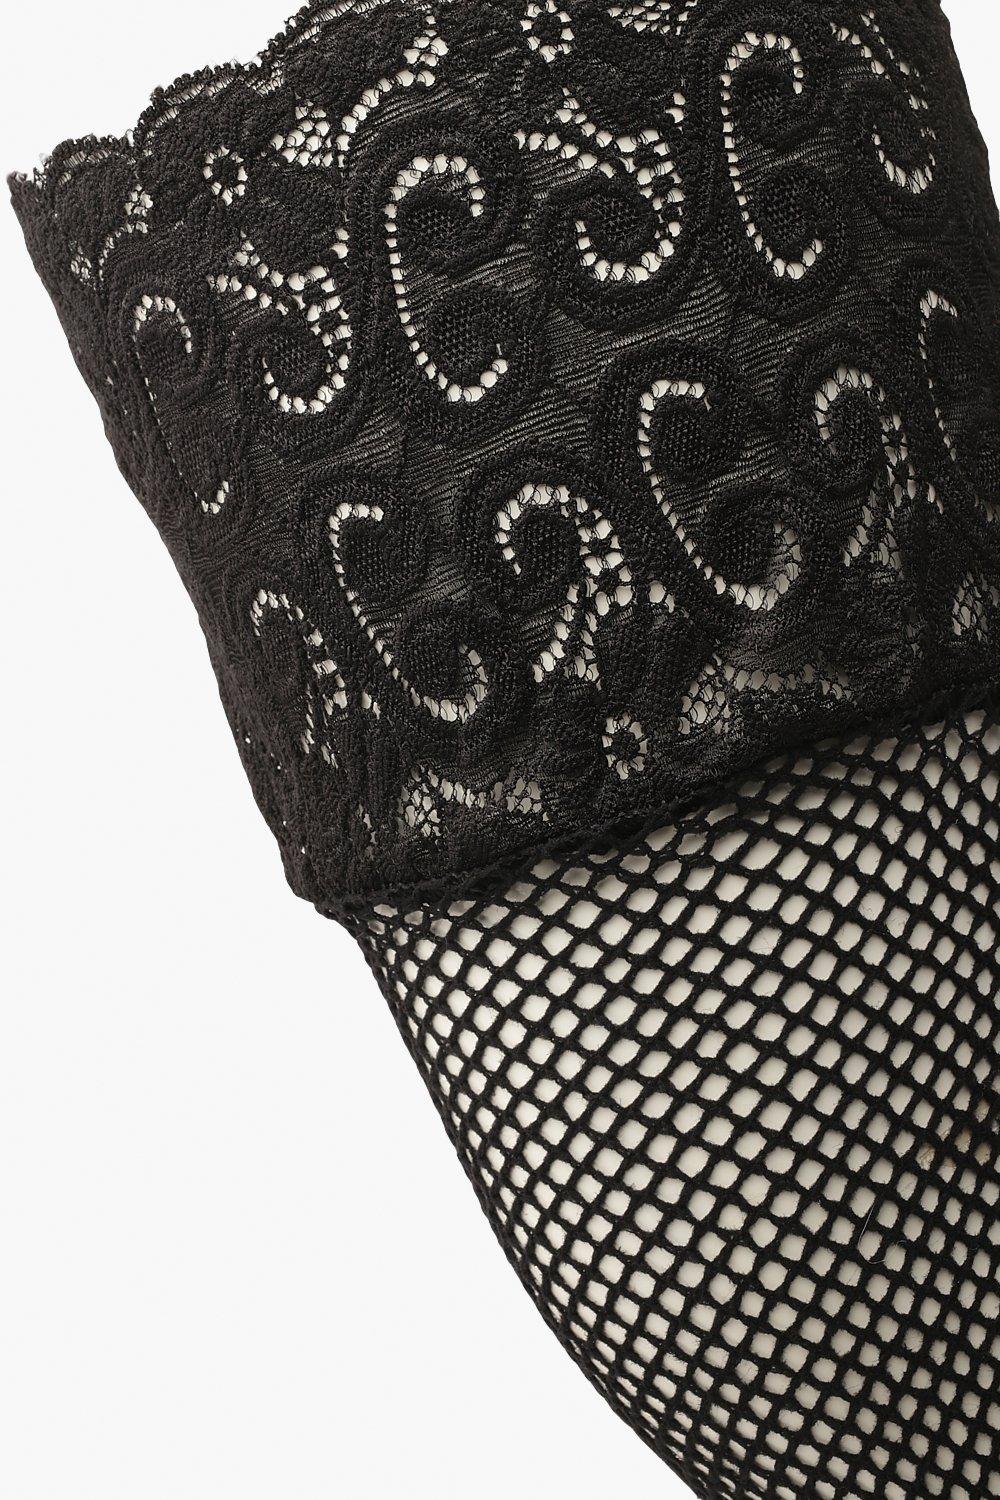 Lace Top Fishnet Stockings